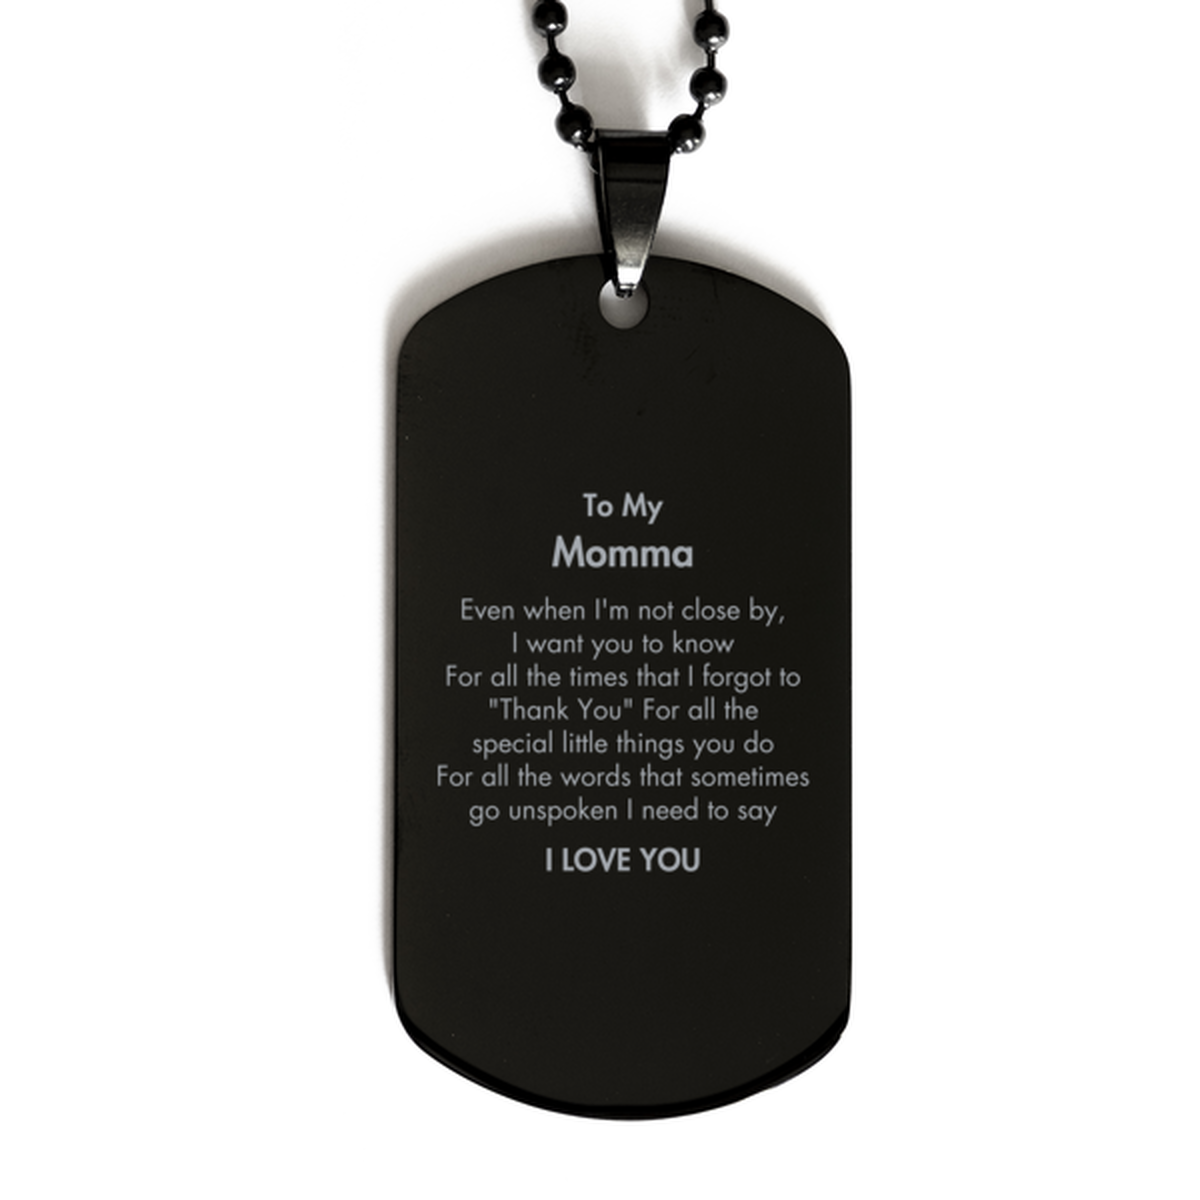 Thank You Gifts for Momma, Keepsake Black Dog Tag Gifts for Momma Birthday Mother's day Father's Day Momma For all the words That sometimes go unspoken I need to say I LOVE YOU